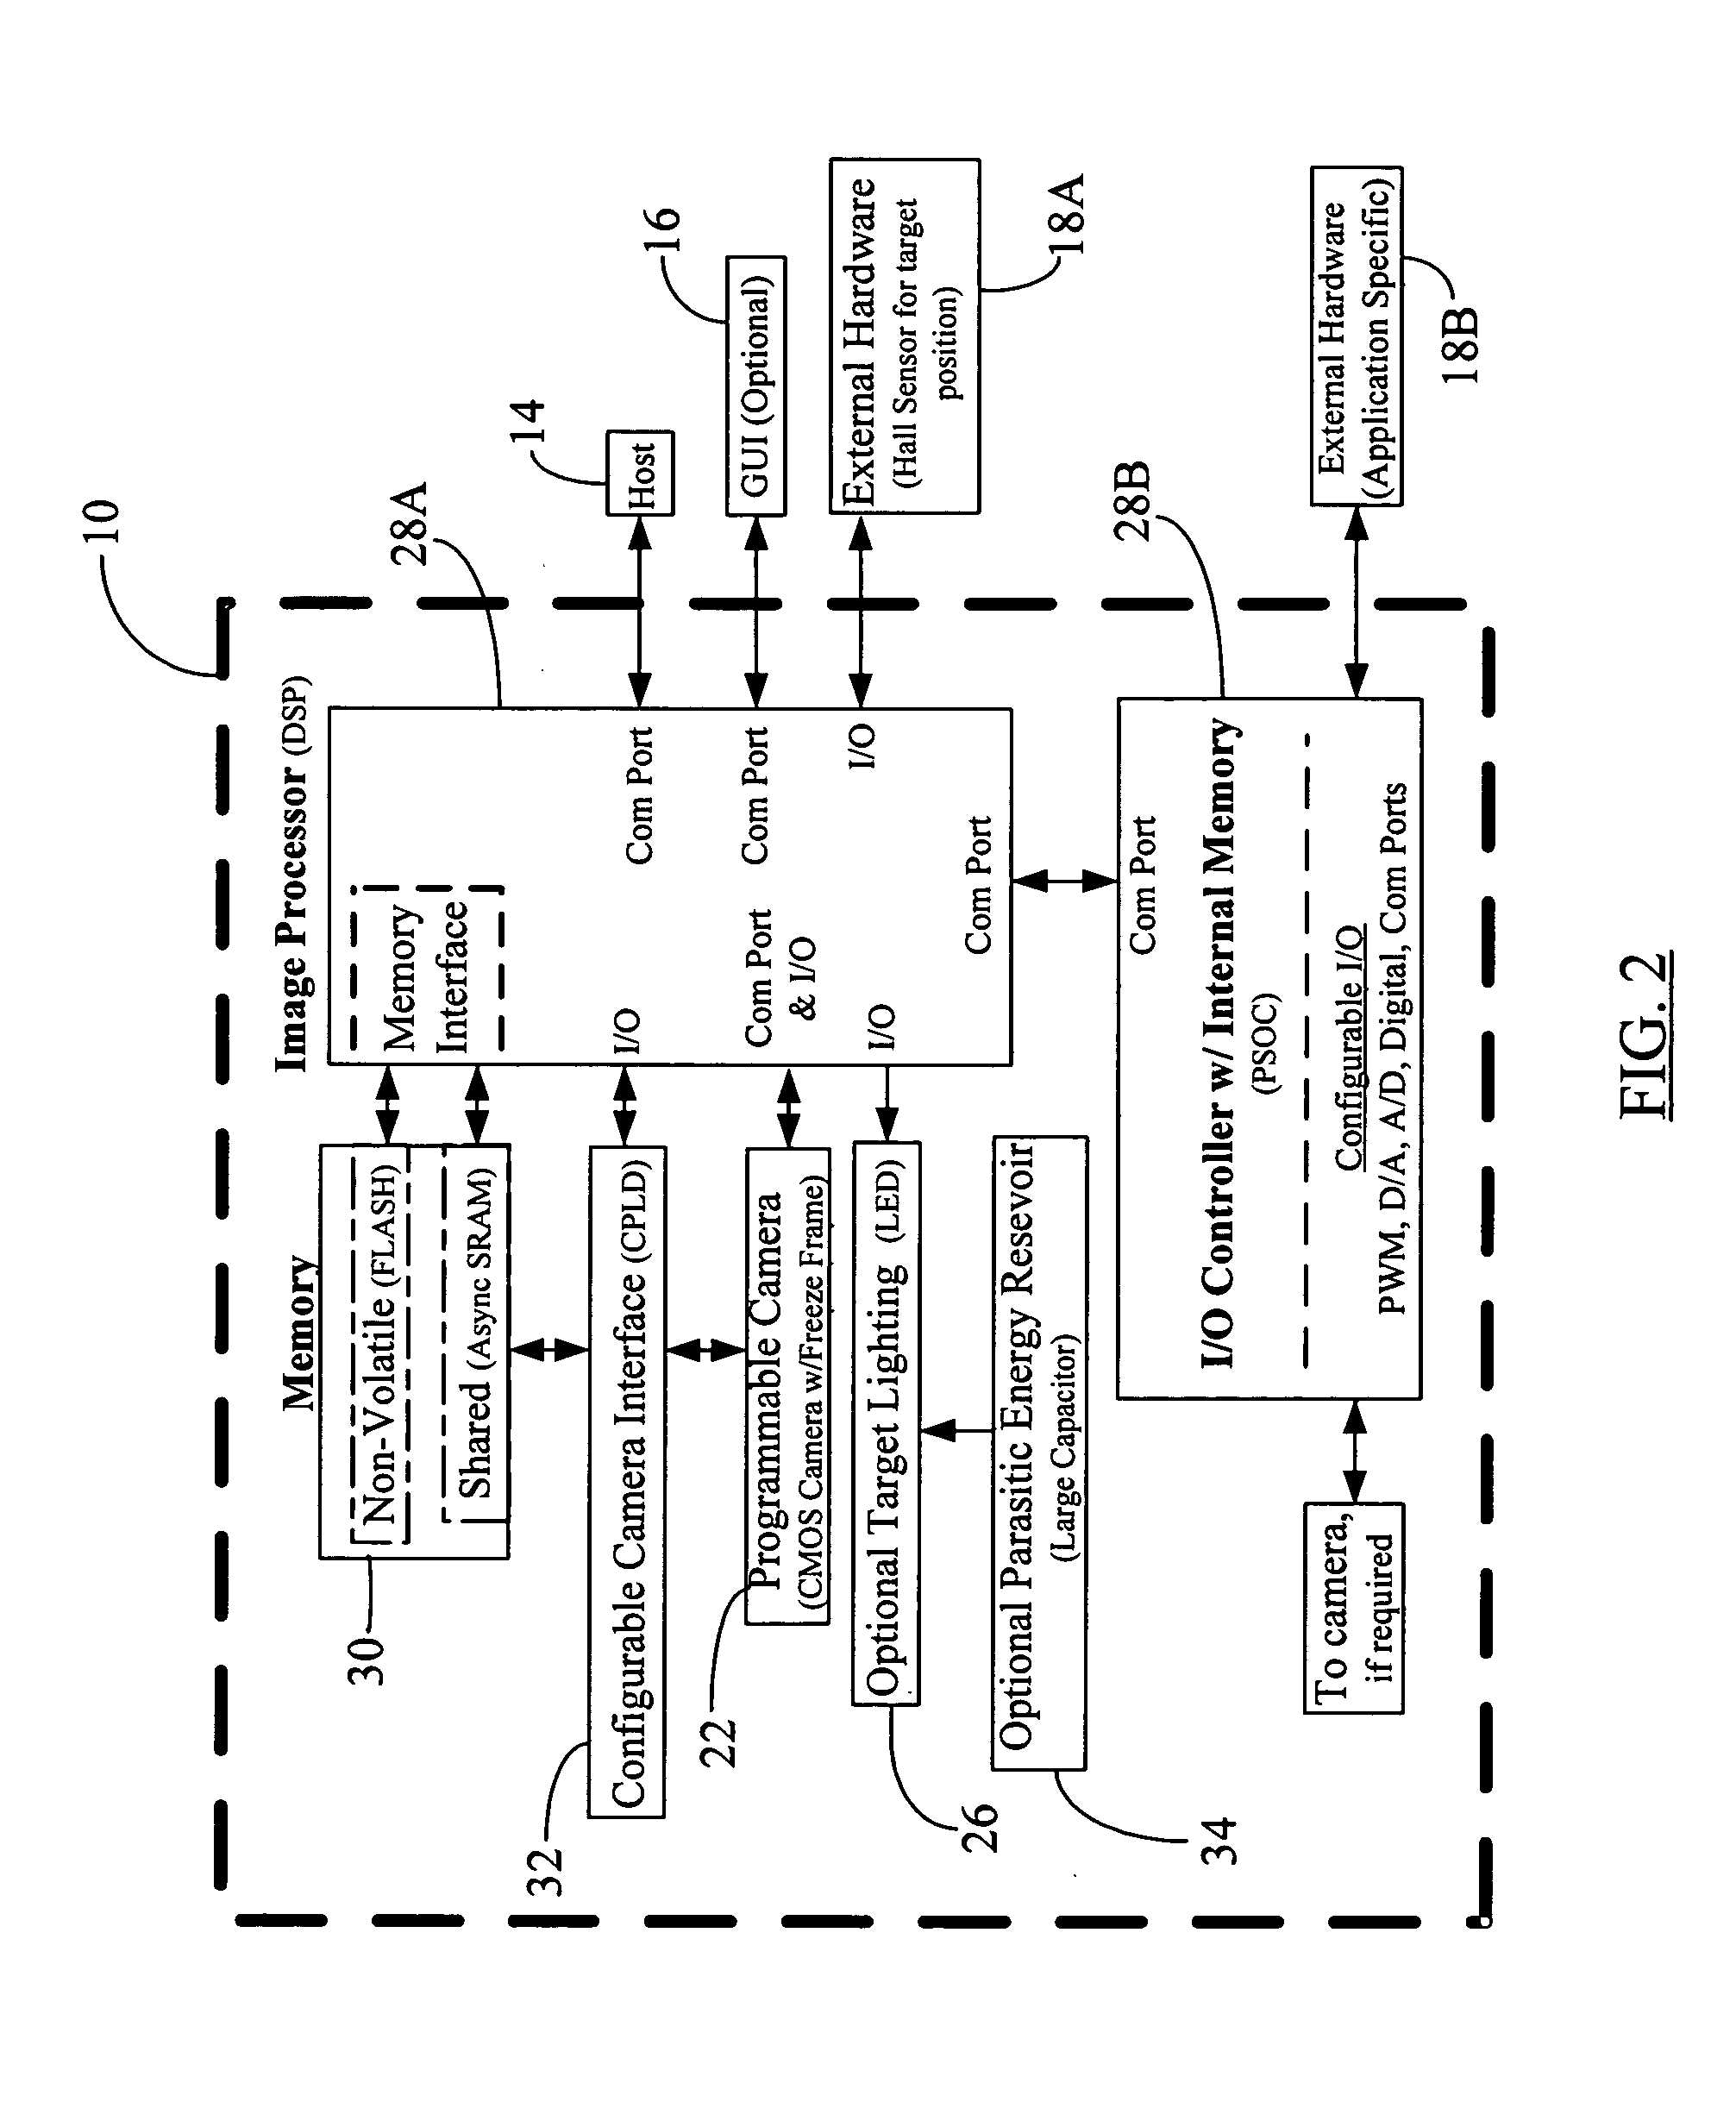 Embedded imaging and control system